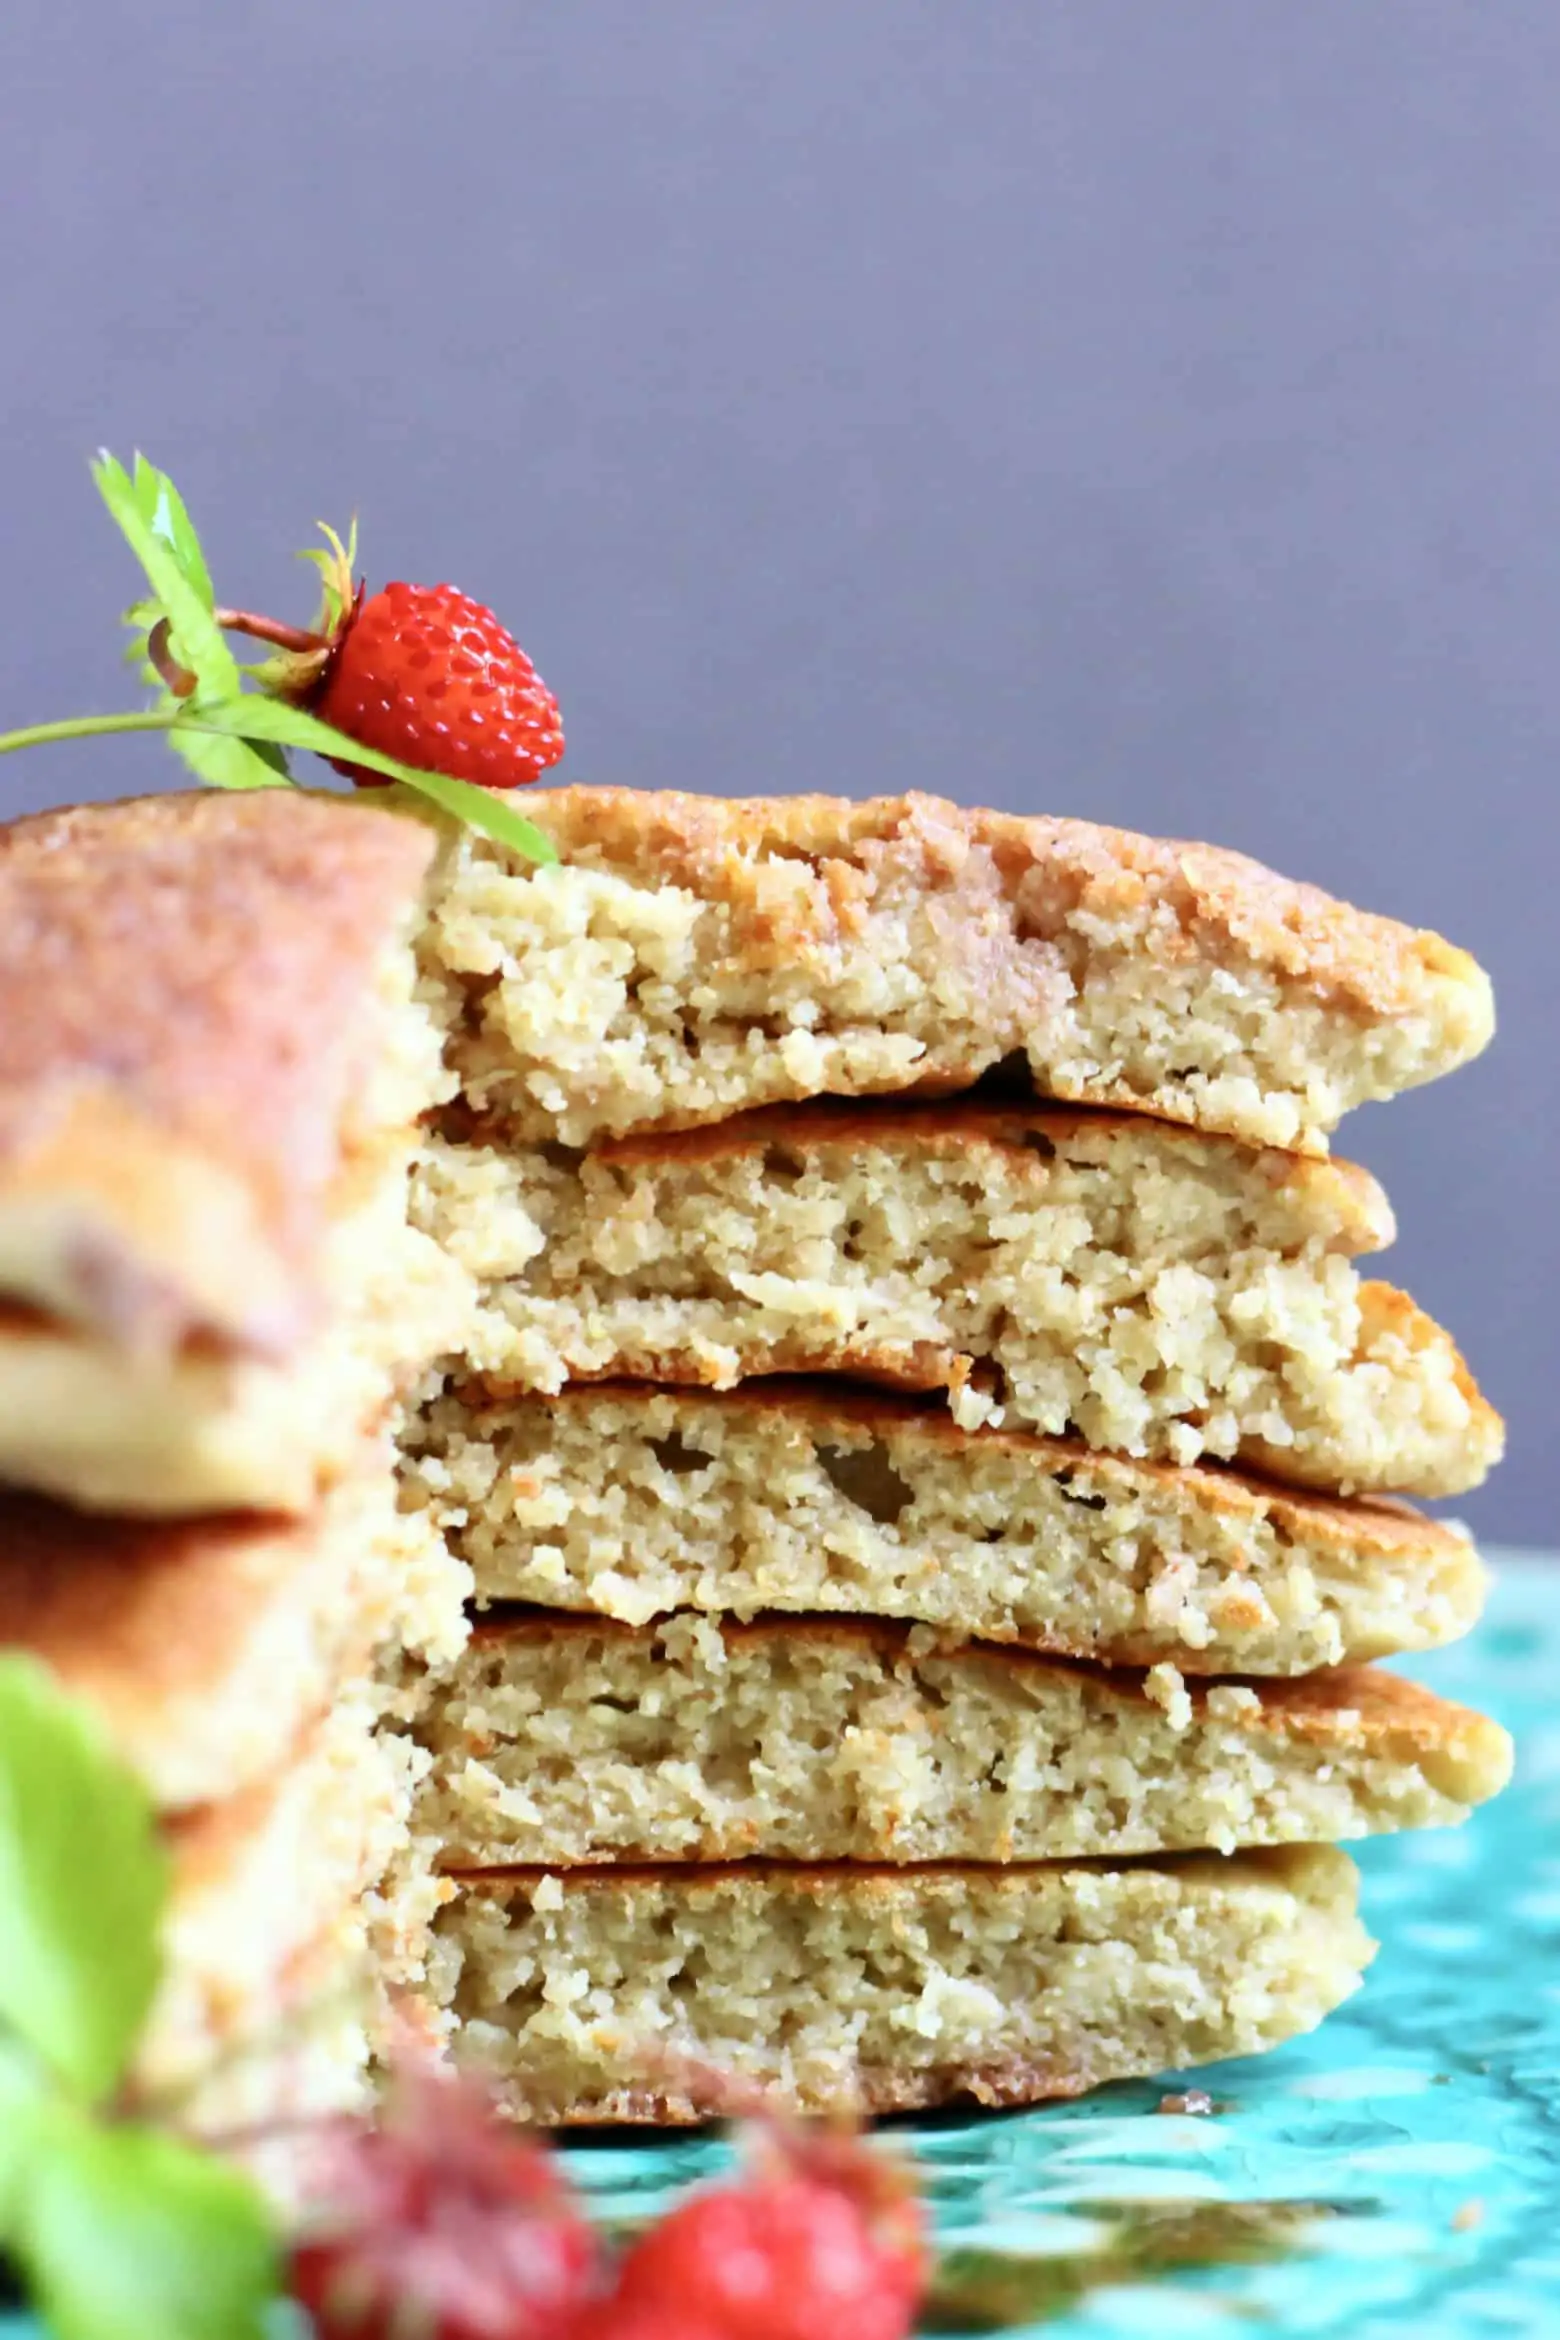 A sliced stack of five quinoa pancakes on a plate